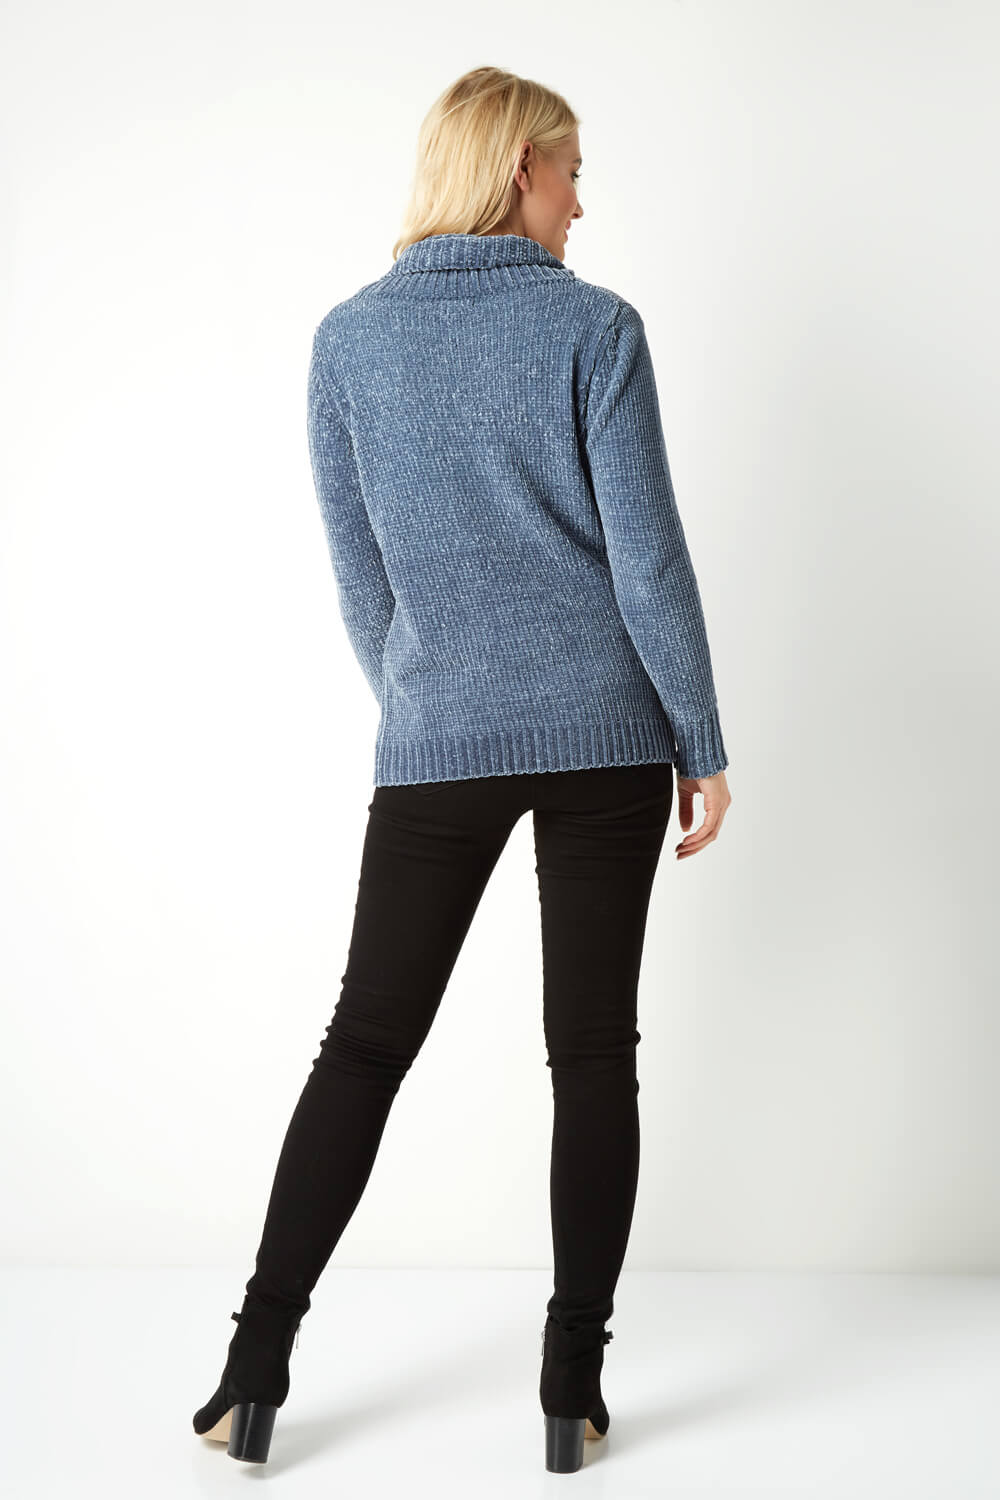 Blue Chenille Cowl Neck Jumper, Image 3 of 4